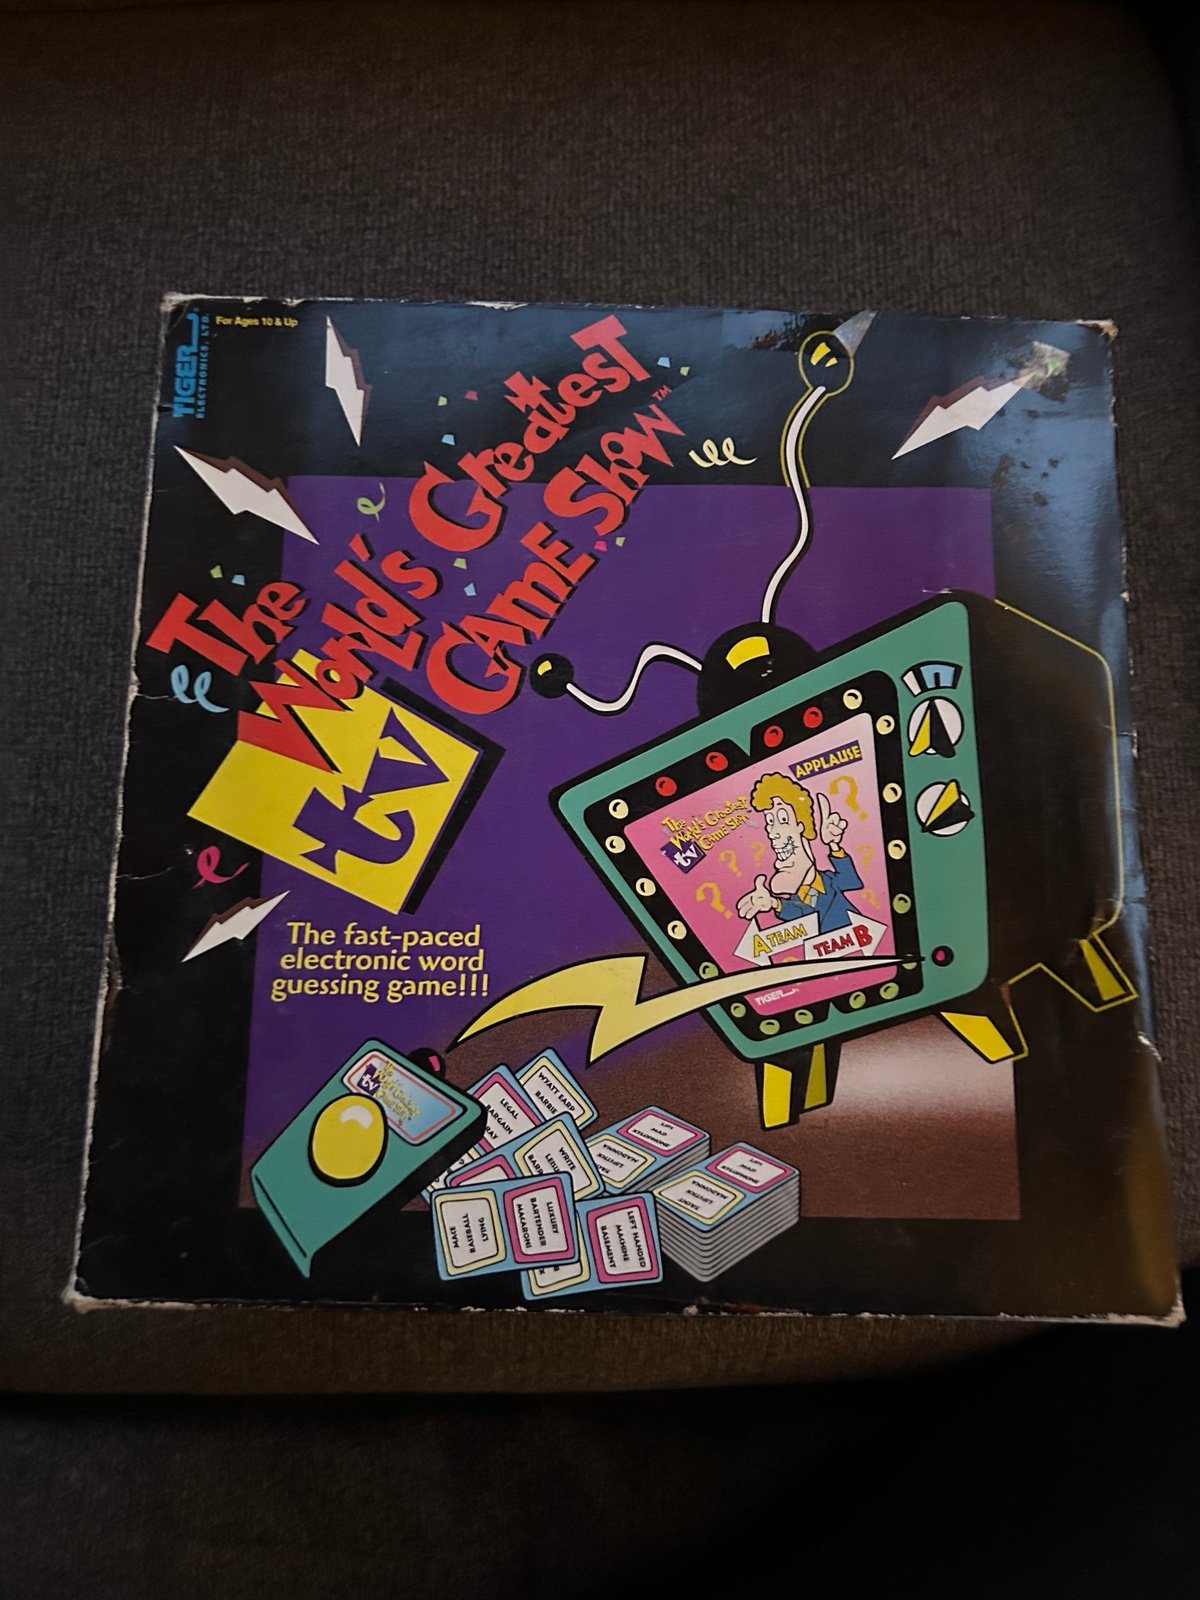 Vintage 1999 Worlds Greatest Tv game Show game by Tiger tEbFrBPzo for sale